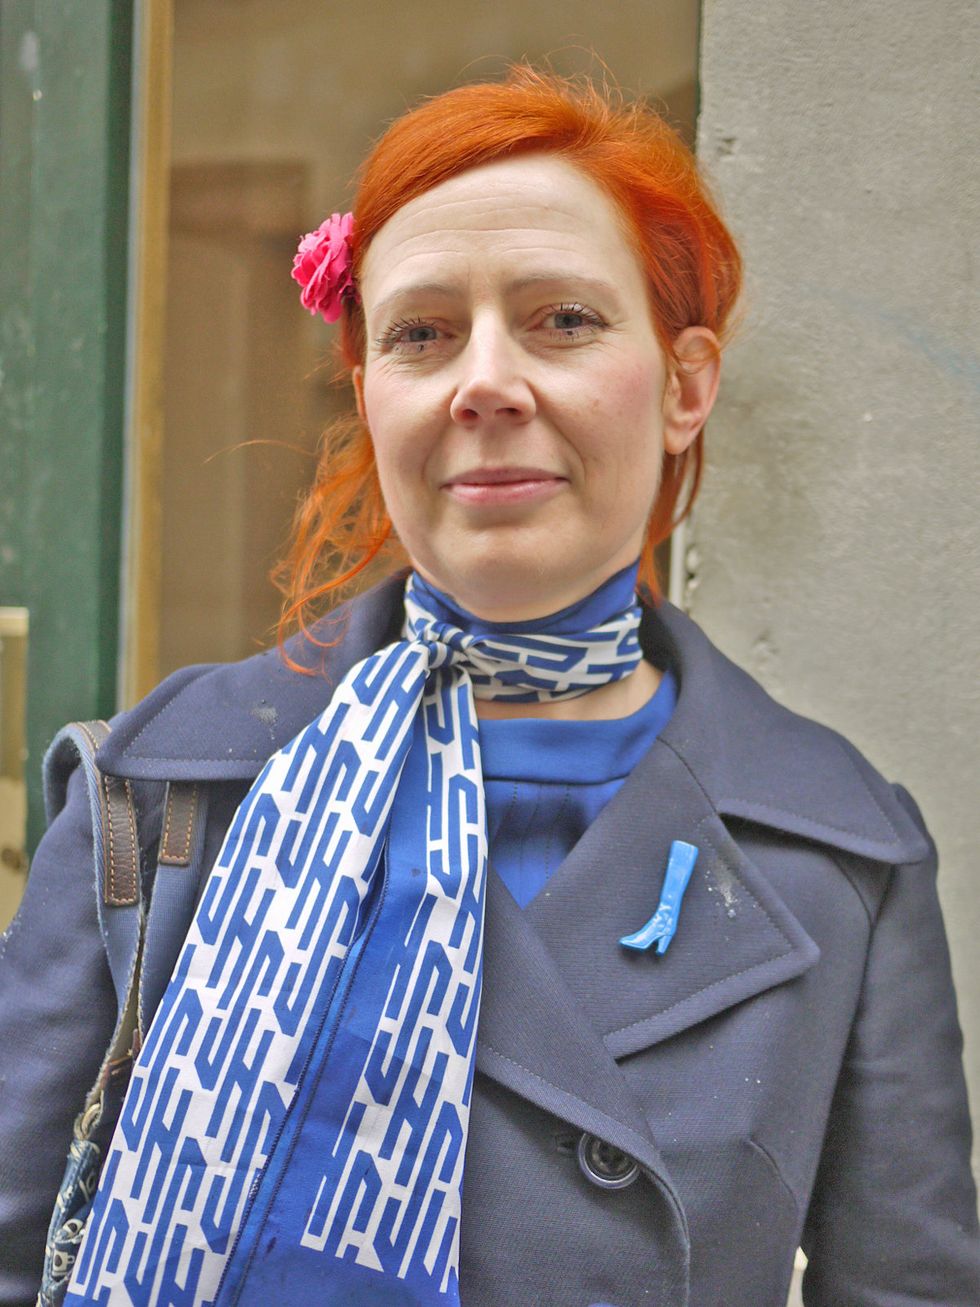 Hairstyle, Collar, Style, Red hair, Street fashion, Fashion, Electric blue, Hair coloring, Jacket, Blazer, 